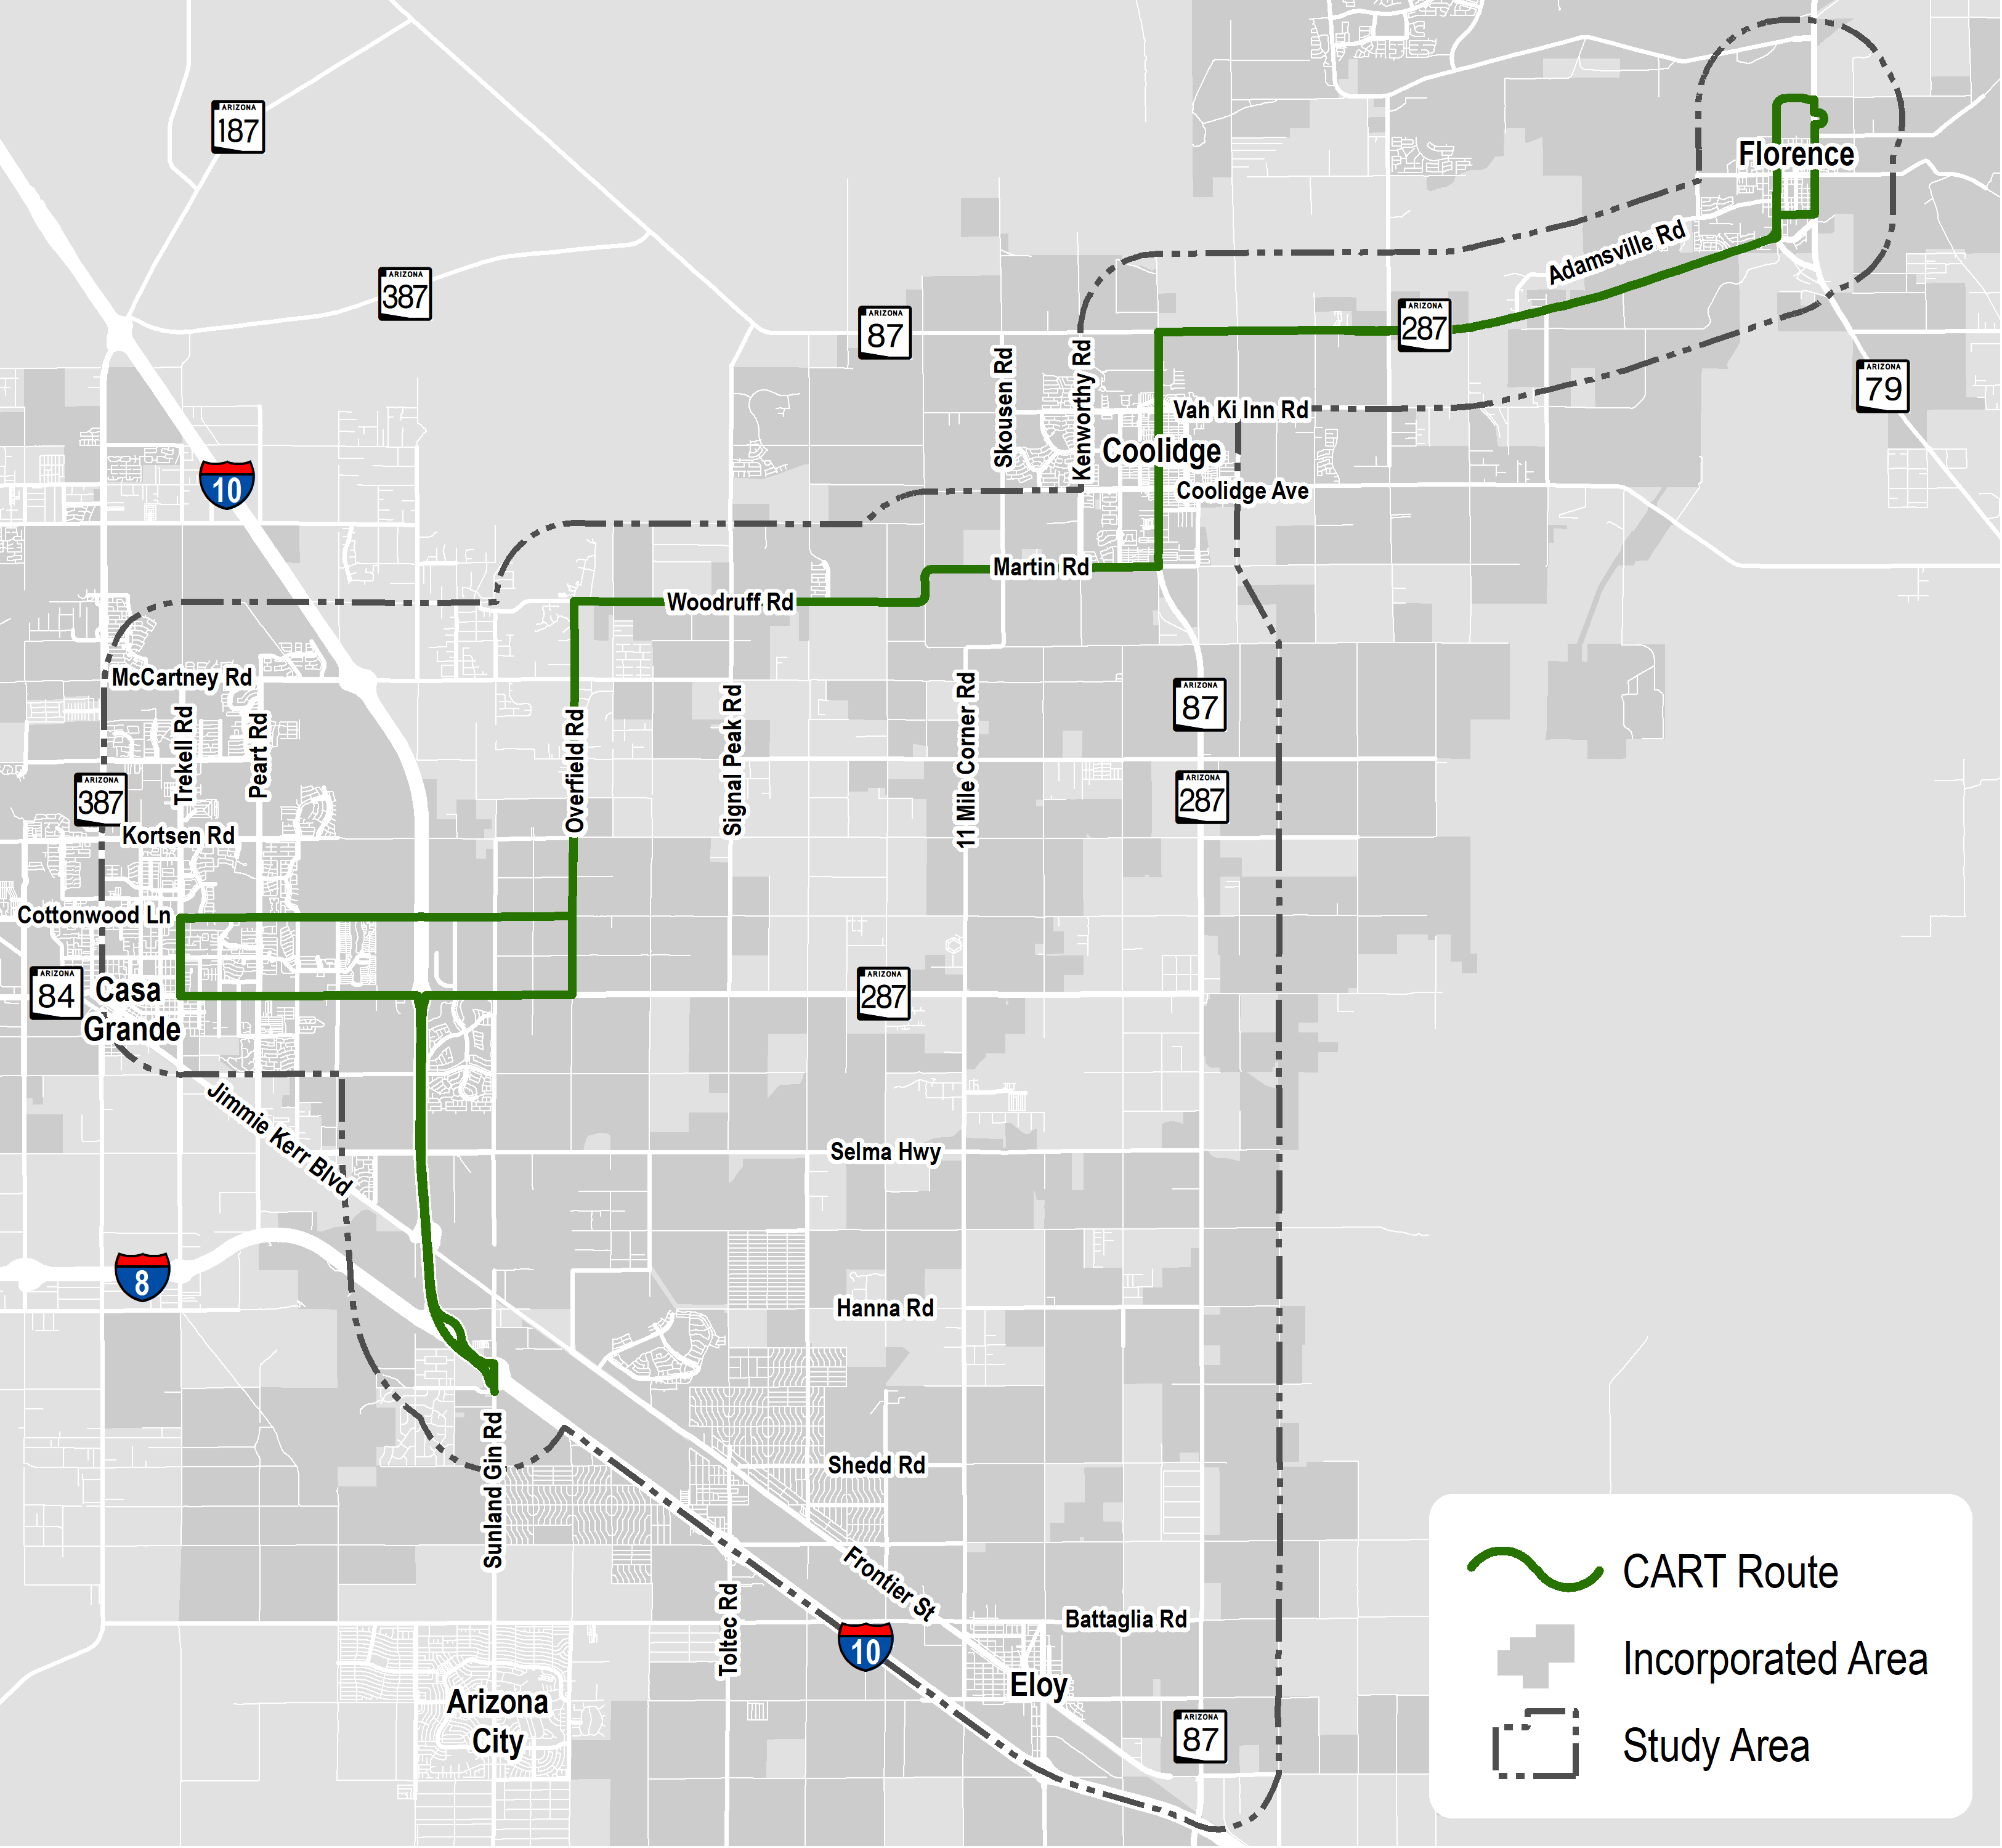 This map demonstrates the Study Area of the CART Route Optimization Study.